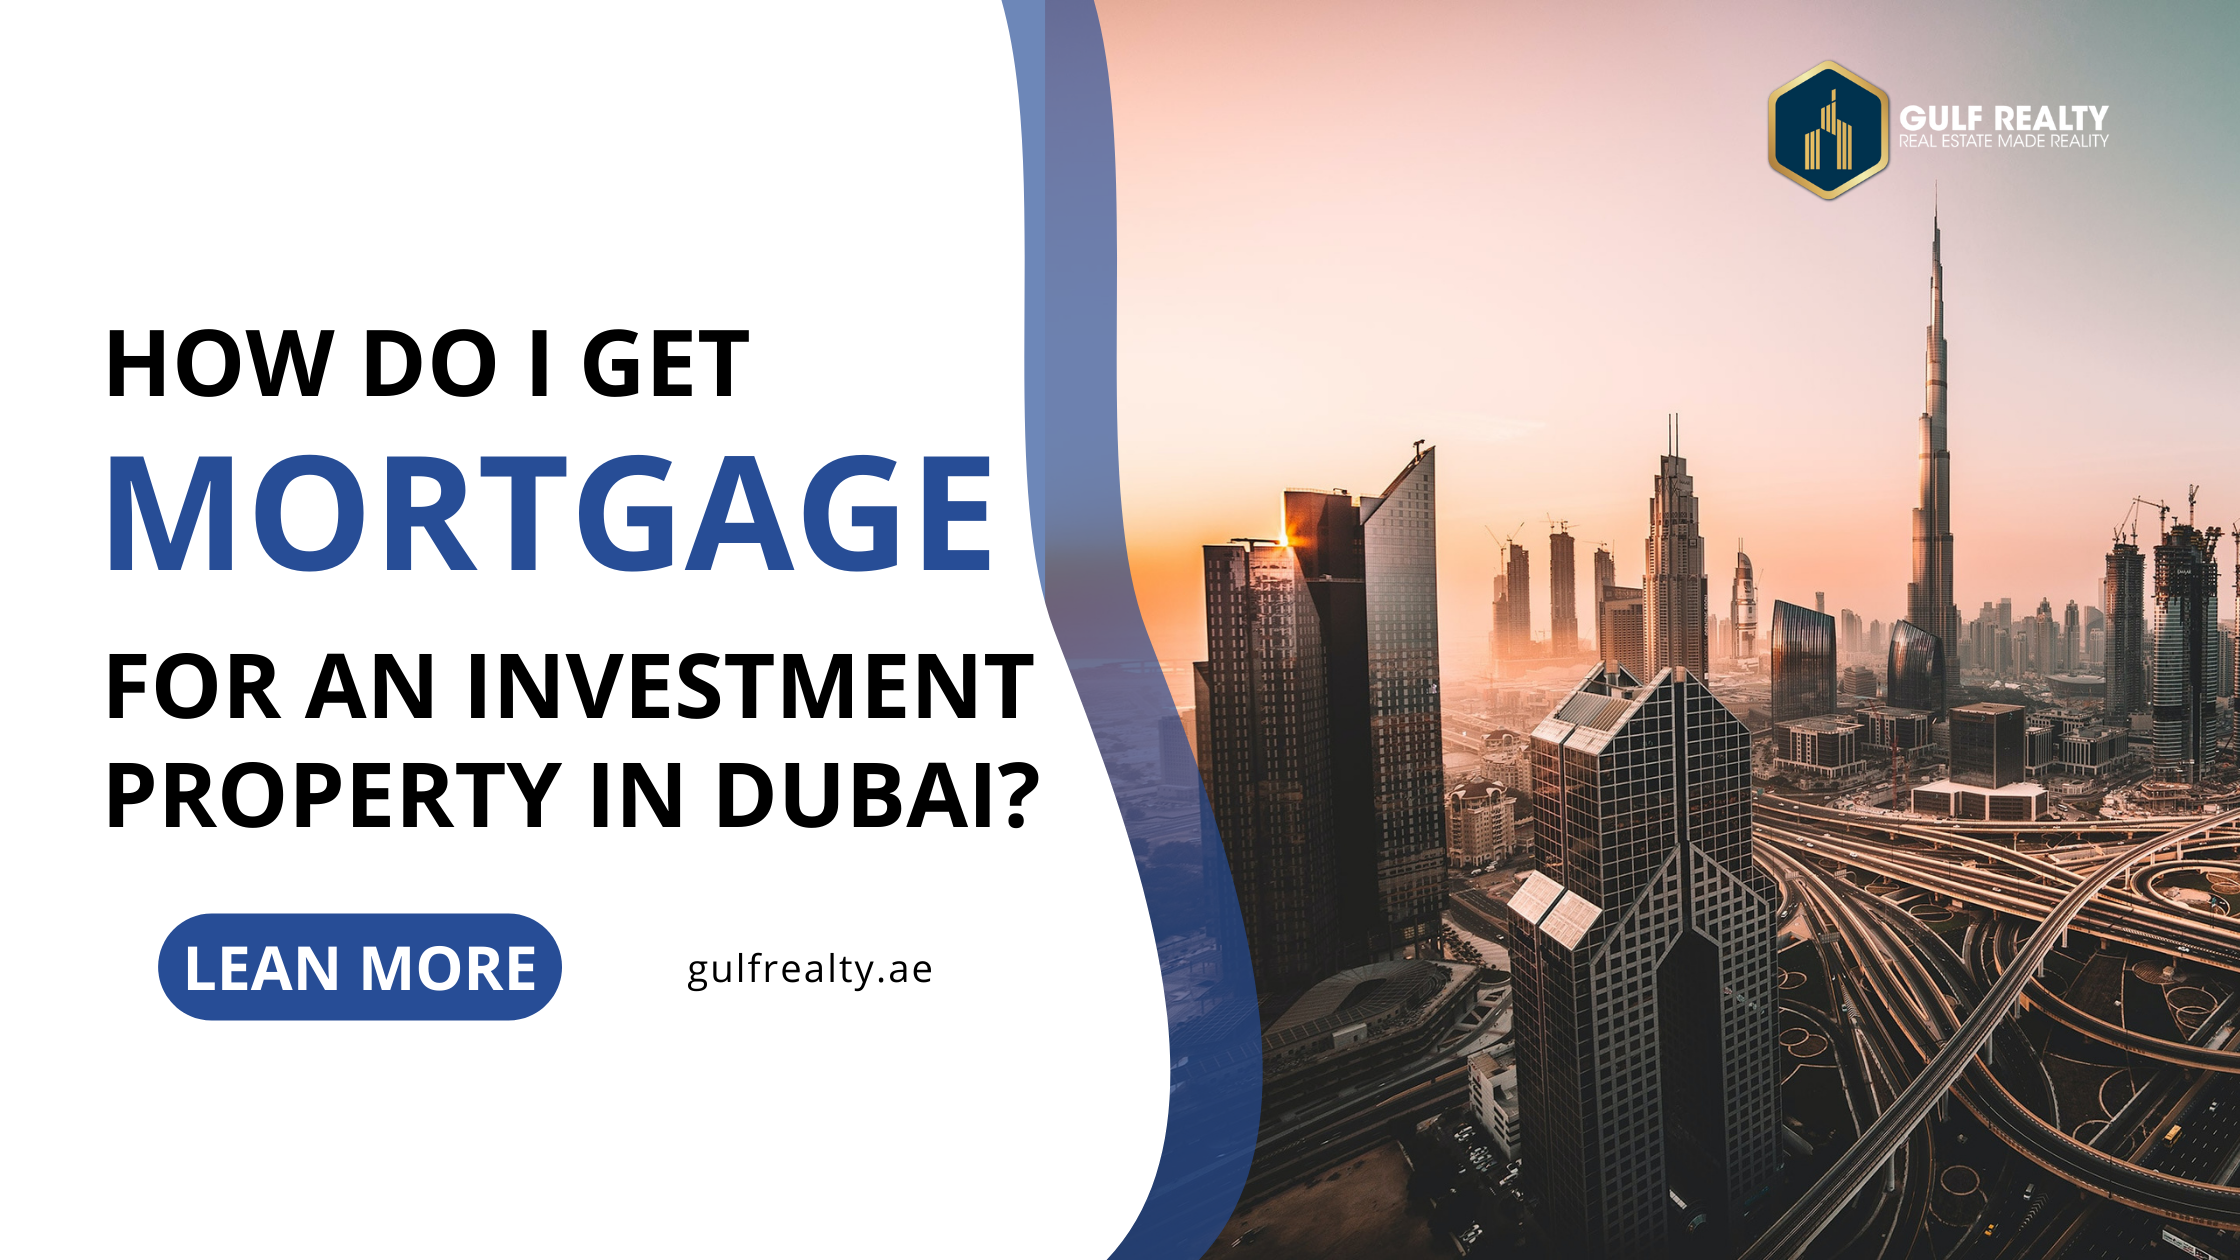 How do I get a mortgage for an investment property in Dubai?